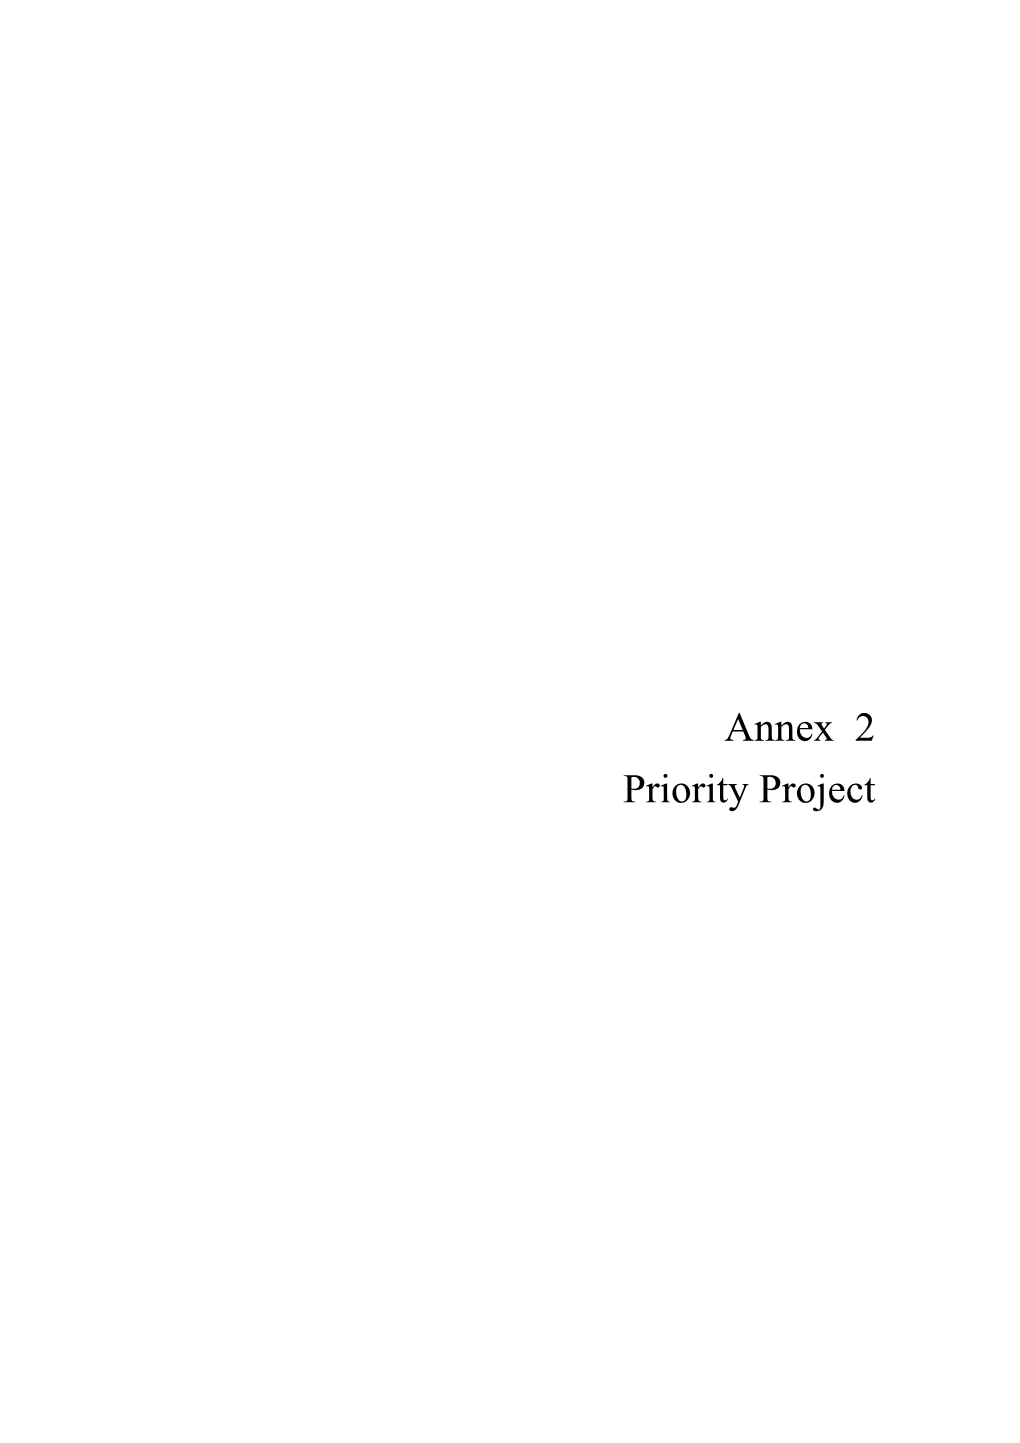 Annex 2 Priority Project the Study on Regional Development of the Phnom Penh-Sihanoukville Growth Corridor in the Kingdom of Cambodia